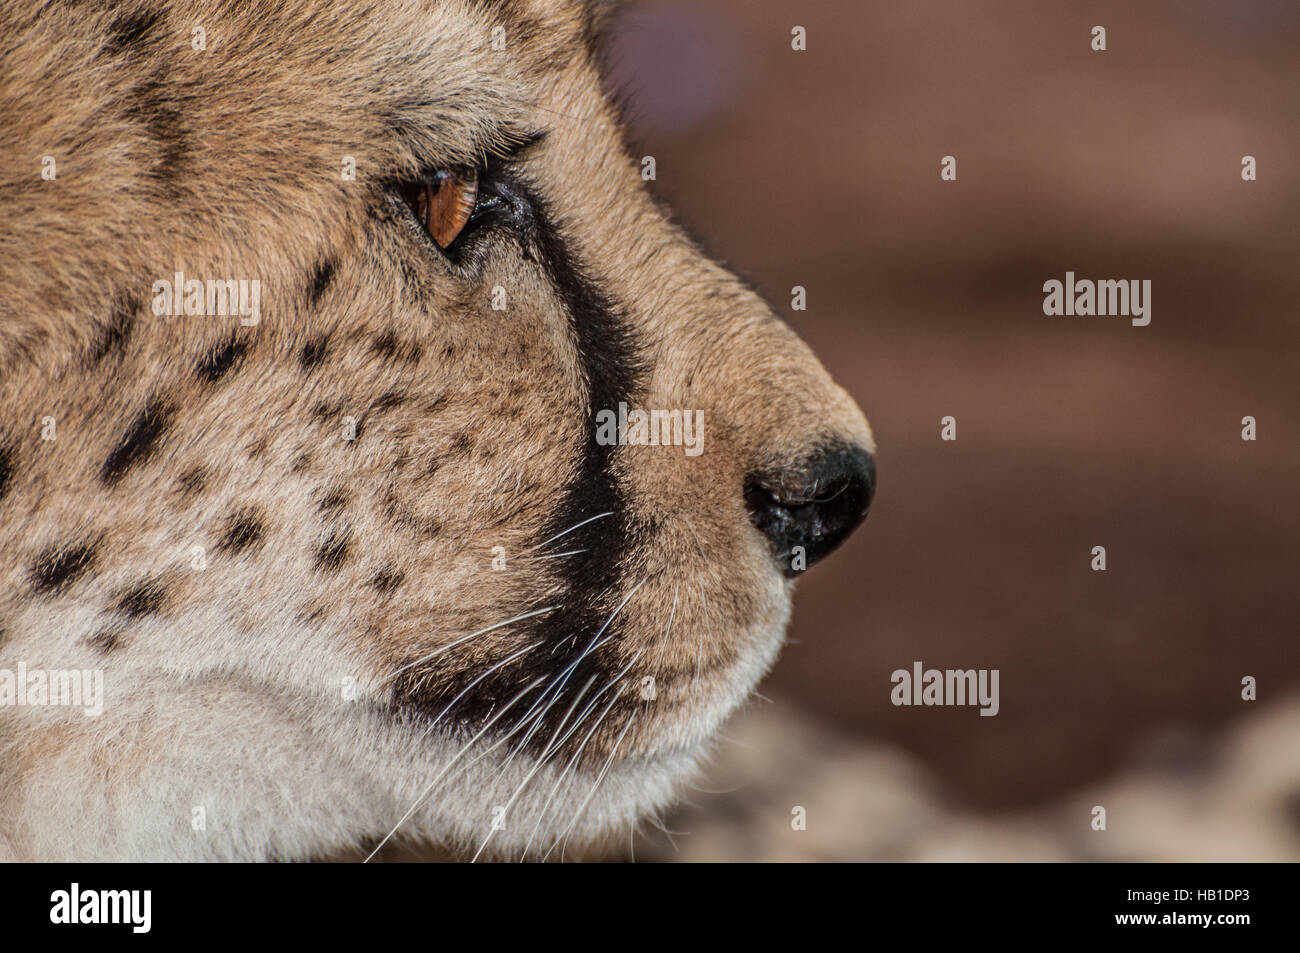 Up Close Portrait of a Cheetah Stock Photo